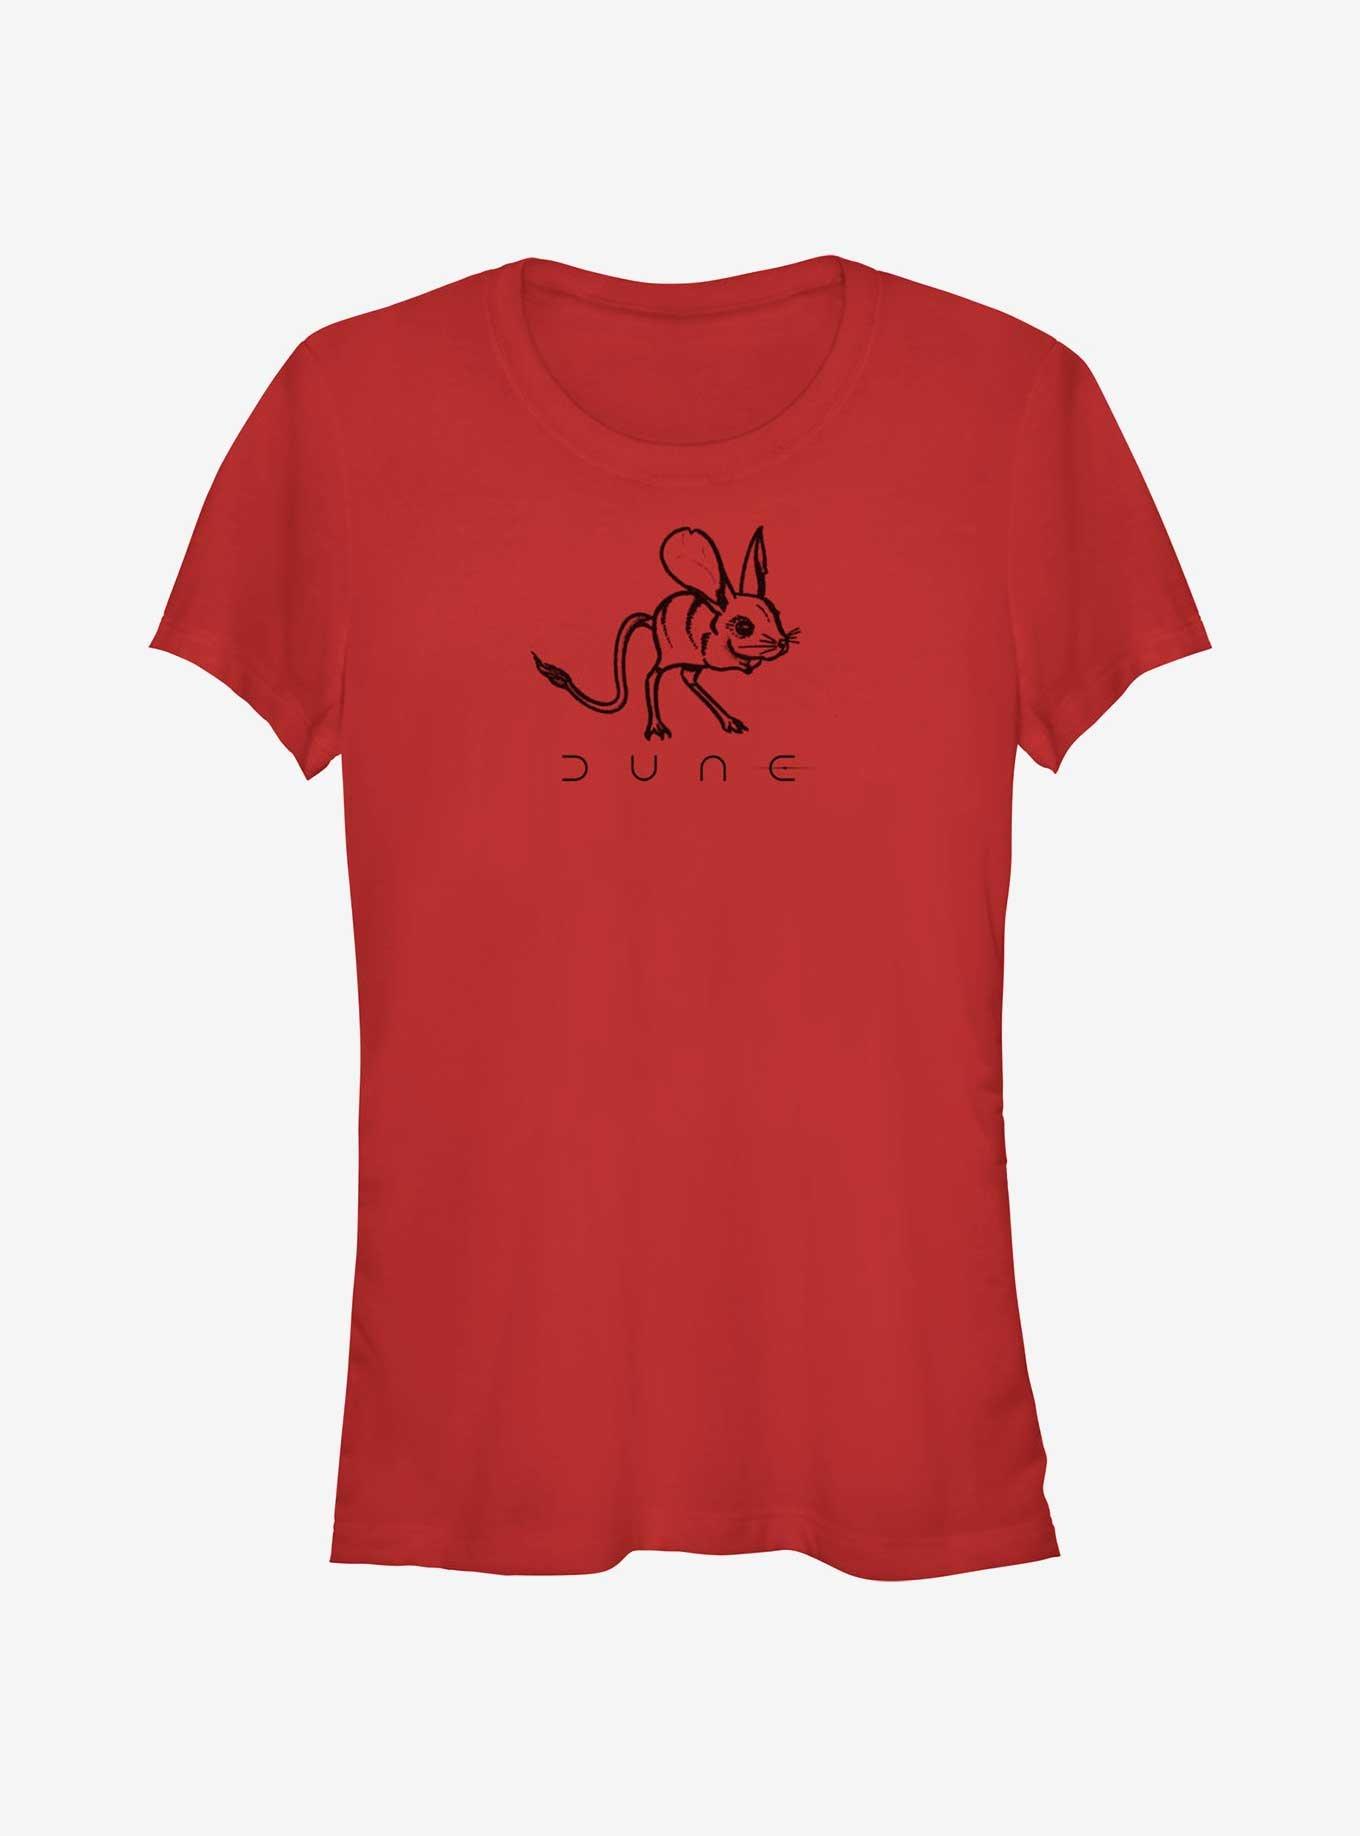 Dune: Part Two Desert Mouse Girls T-Shirt, RED, hi-res